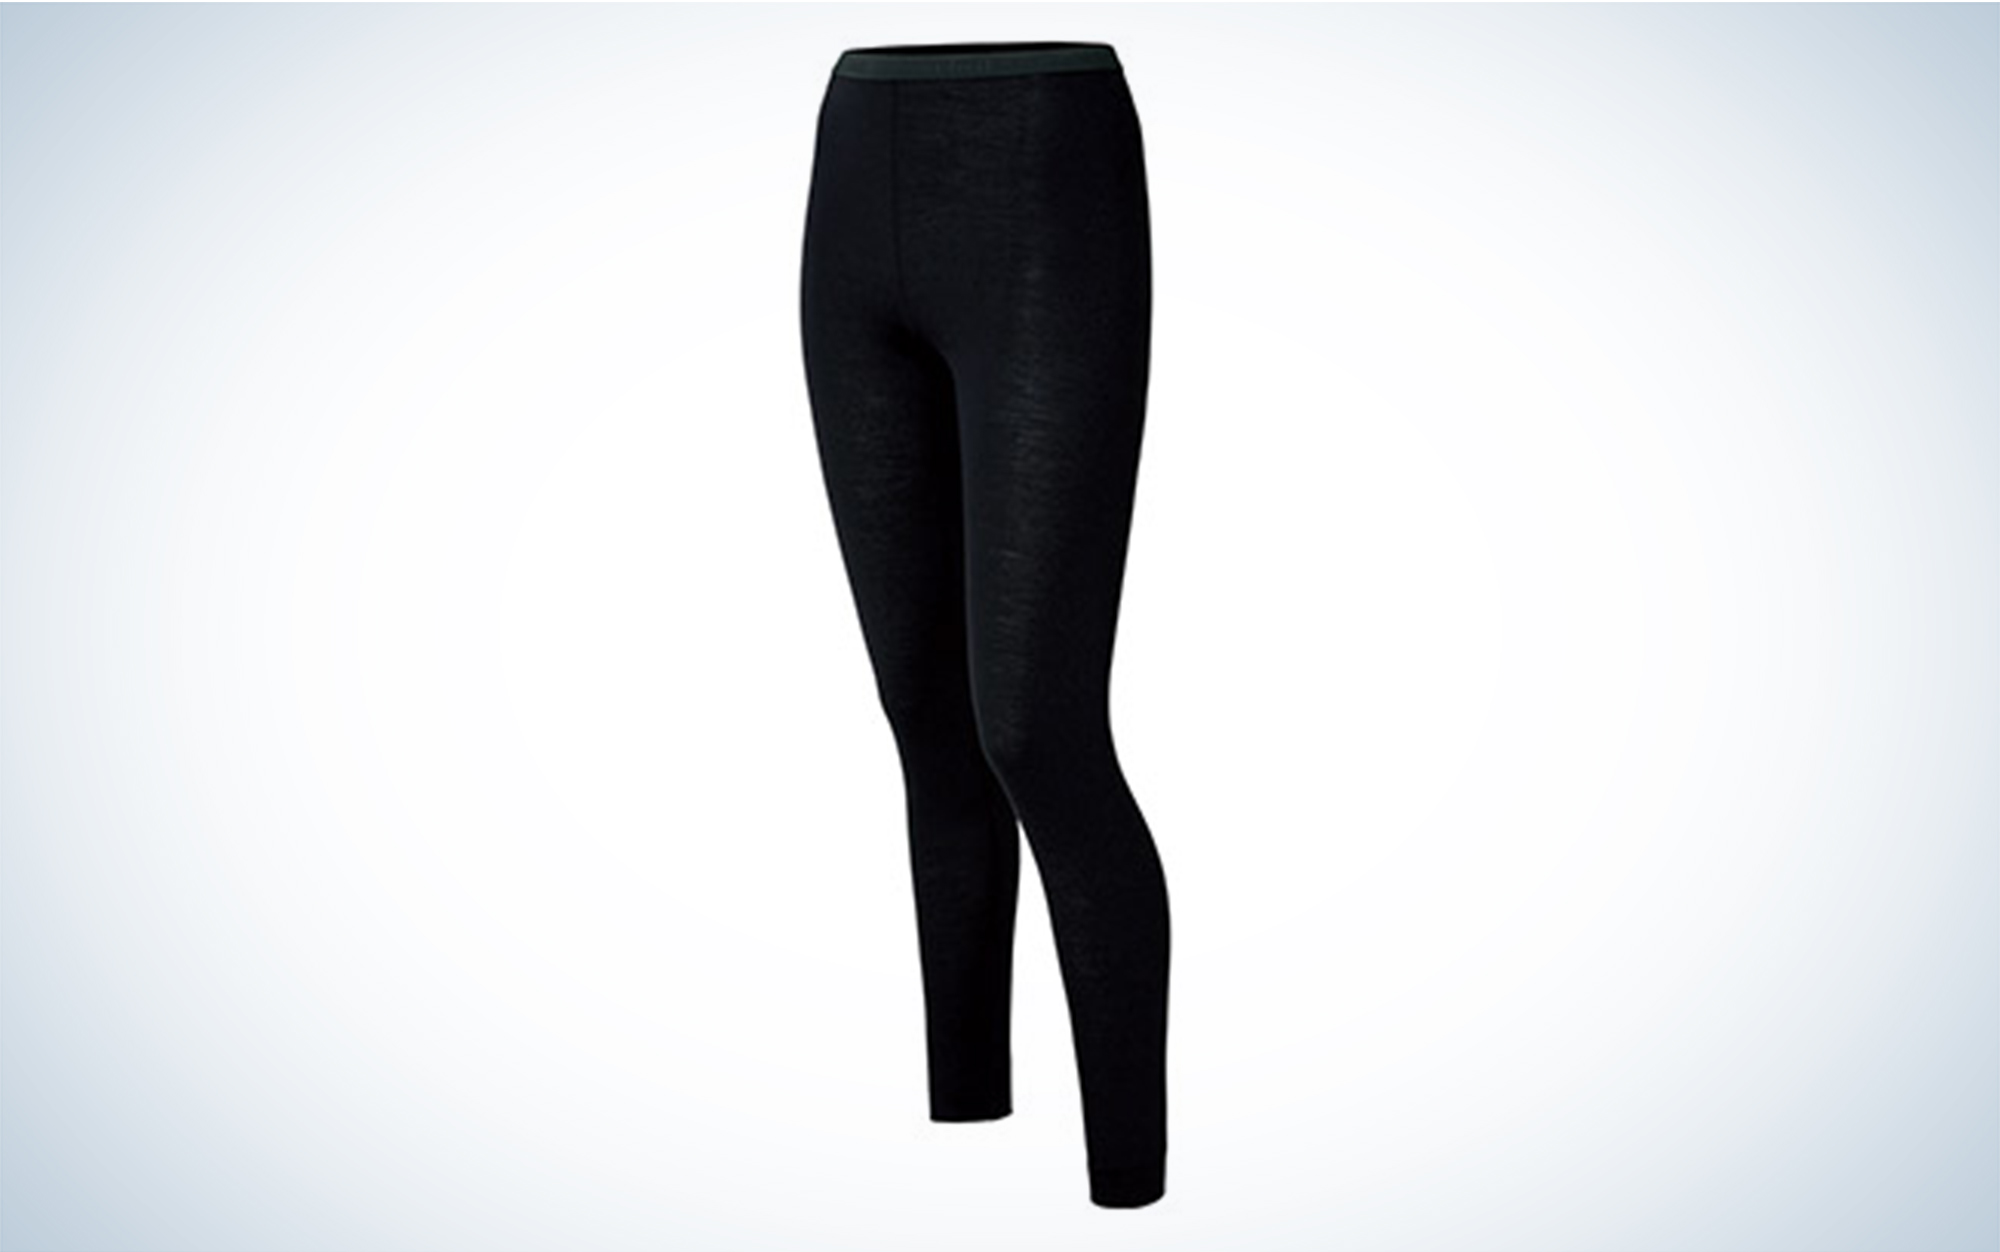 We tested the Montbell Super Merino Wool Lightweight tights.